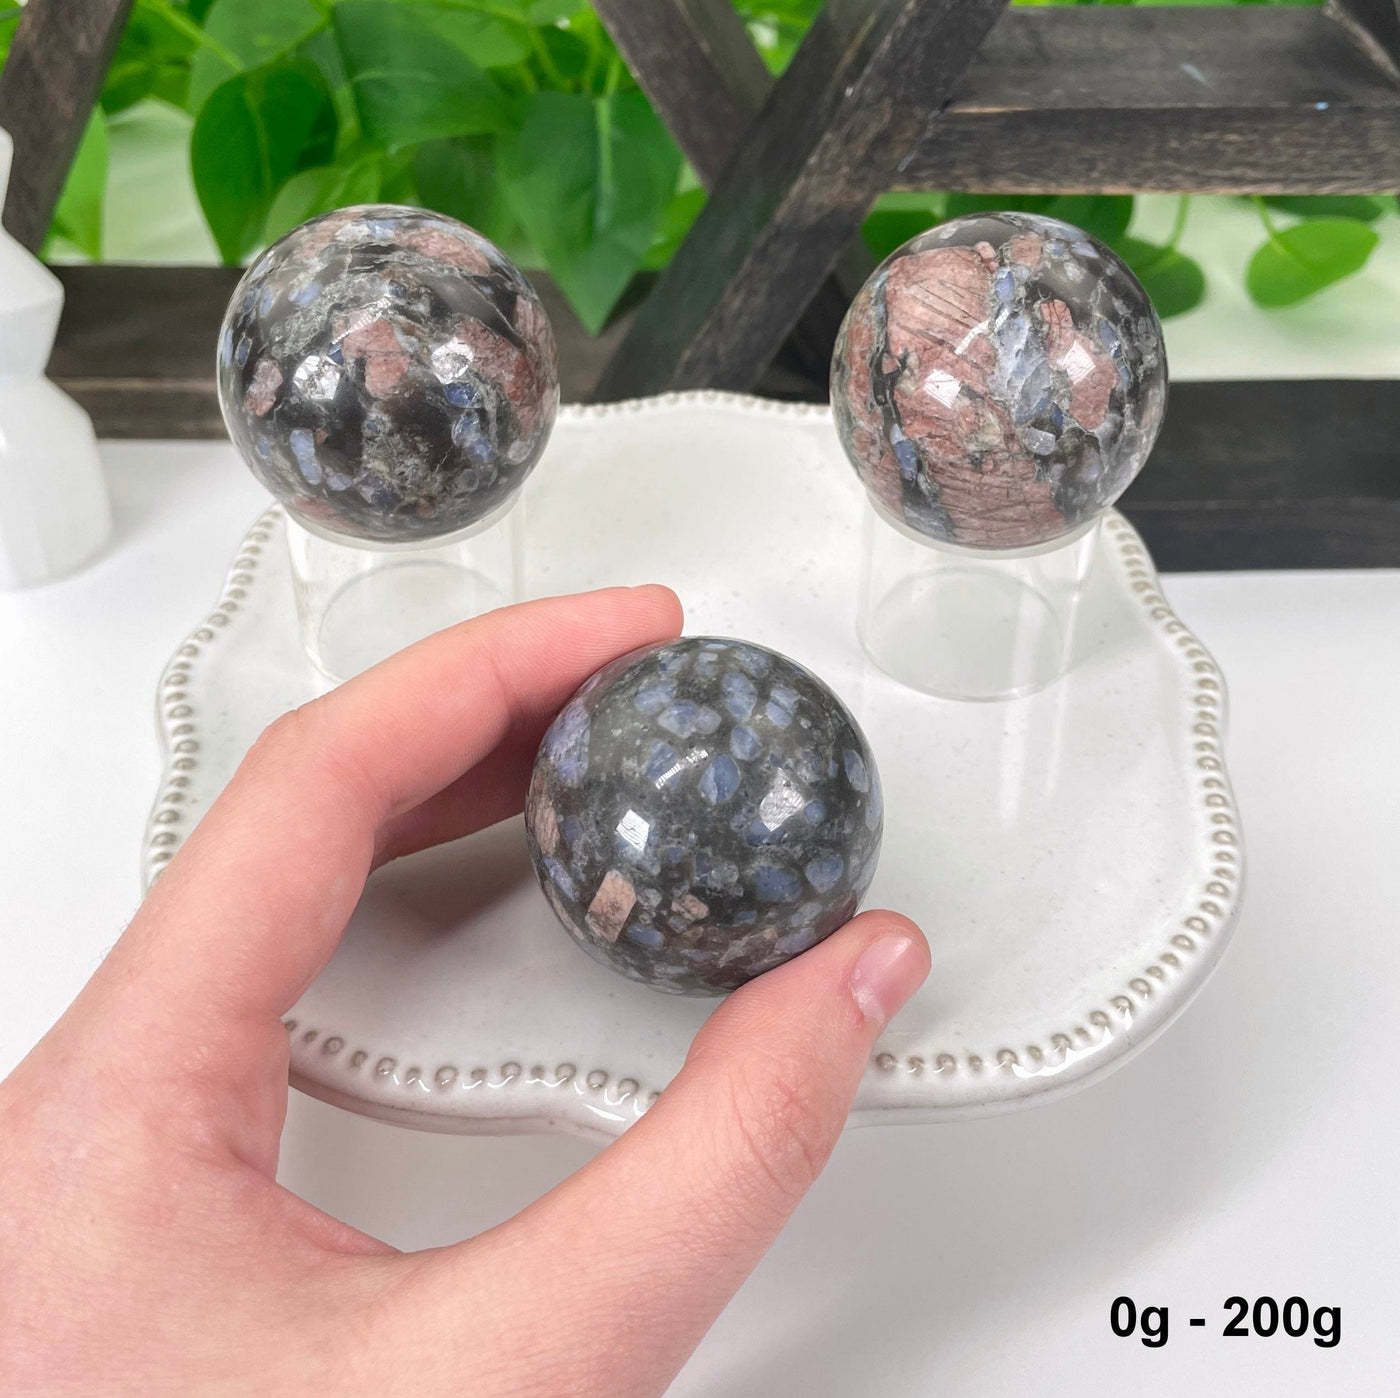 three 0g - 200g rhyolite polished spheres on display in front of backdrop for possible variations with one in hand for size reference